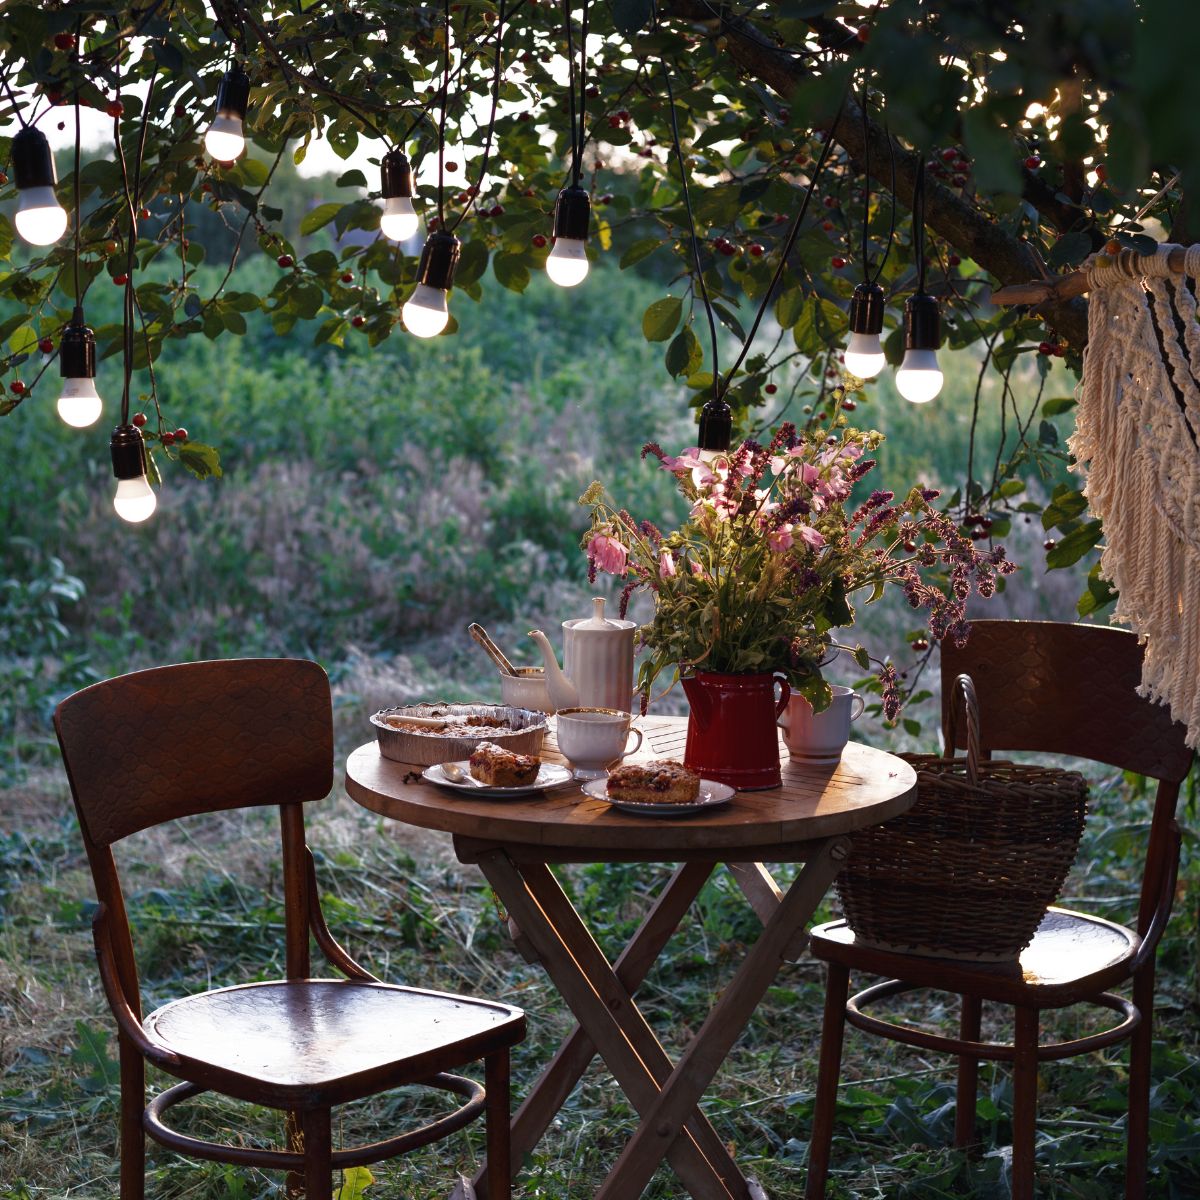 A small romantic spot in the backyard with a table set in the dim lights. 